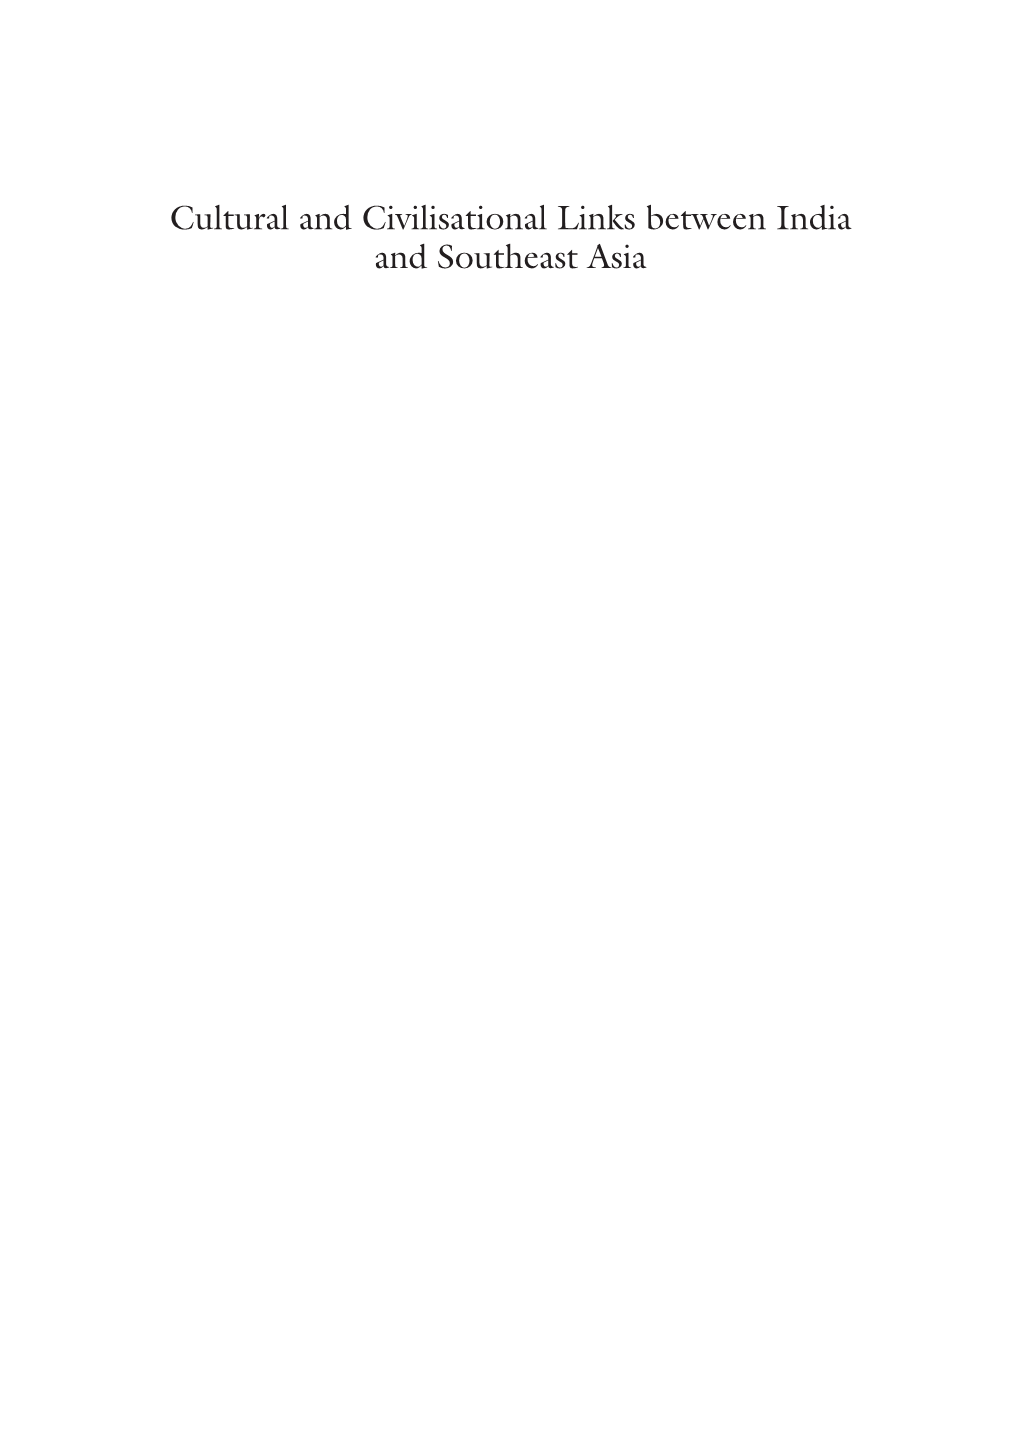 Cultural and Civilisational Links Between India and Southeast Asia Shyam Saran Editor Cultural and Civilisational Links Between India and Southeast Asia